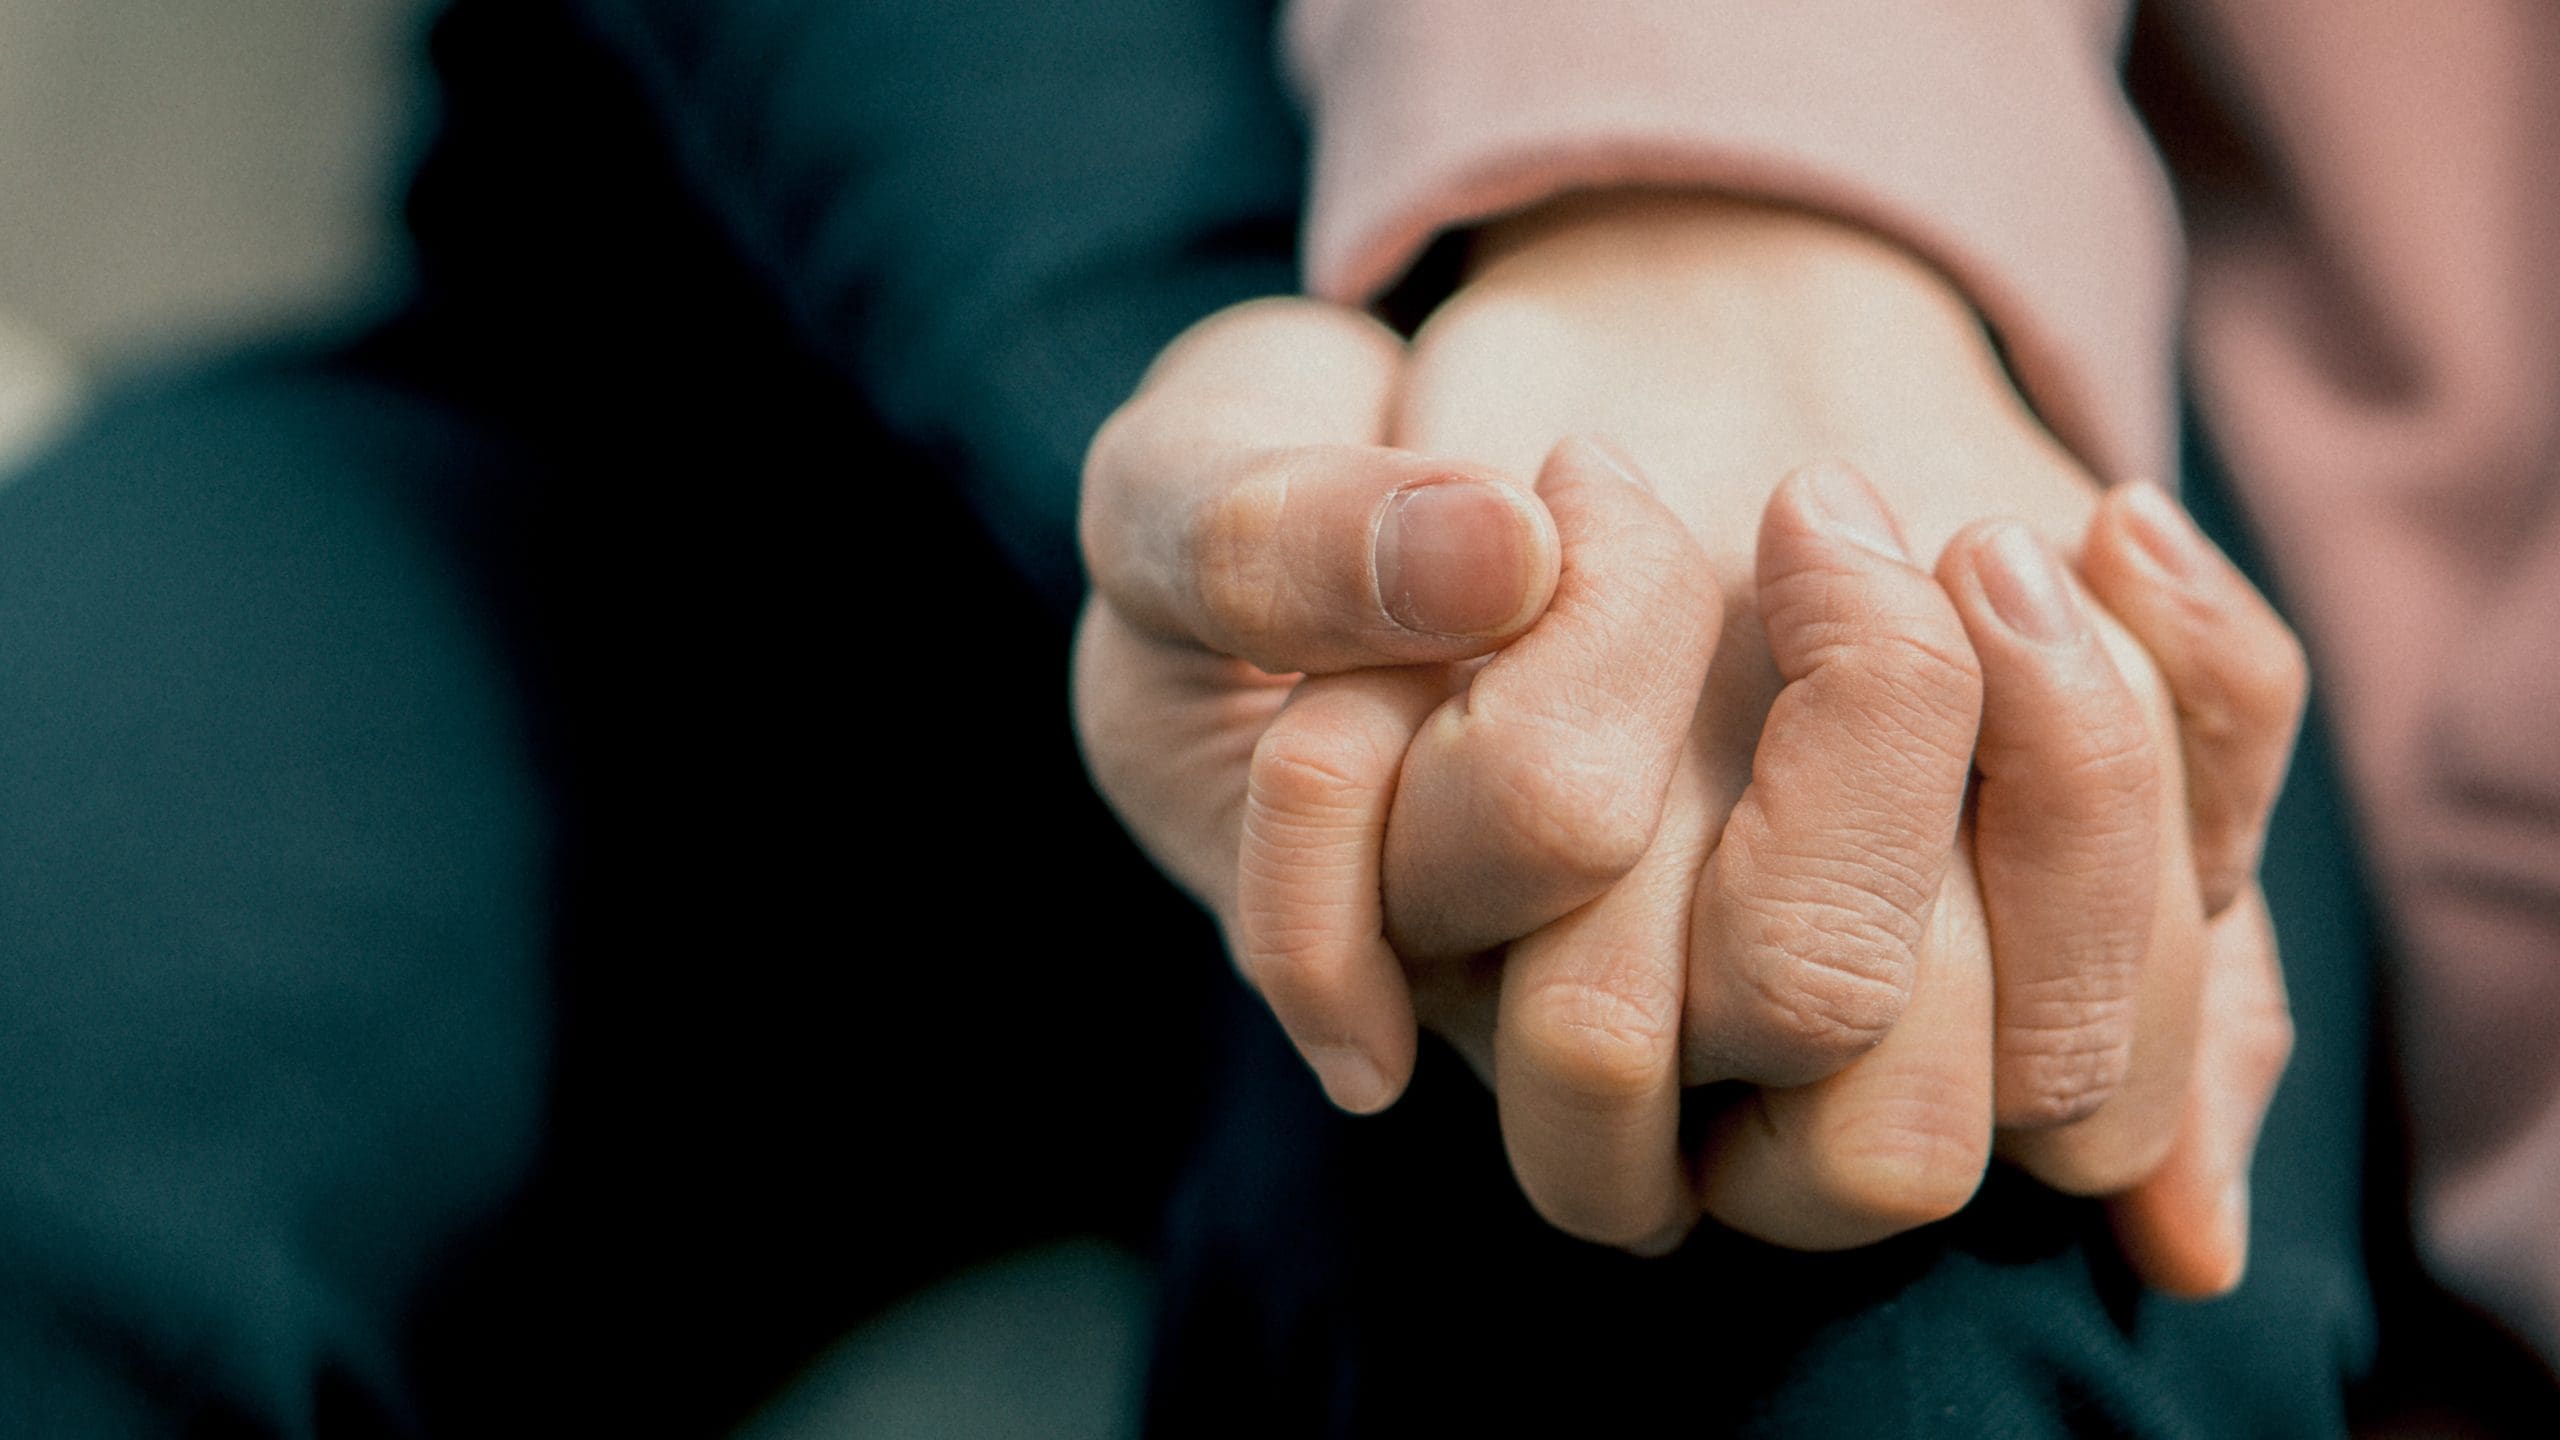 Supporting and Enabling, enabling Photo by Sơn Bờm: https://www.pexels.com/photo/photo-of-holding-hands-1773113/